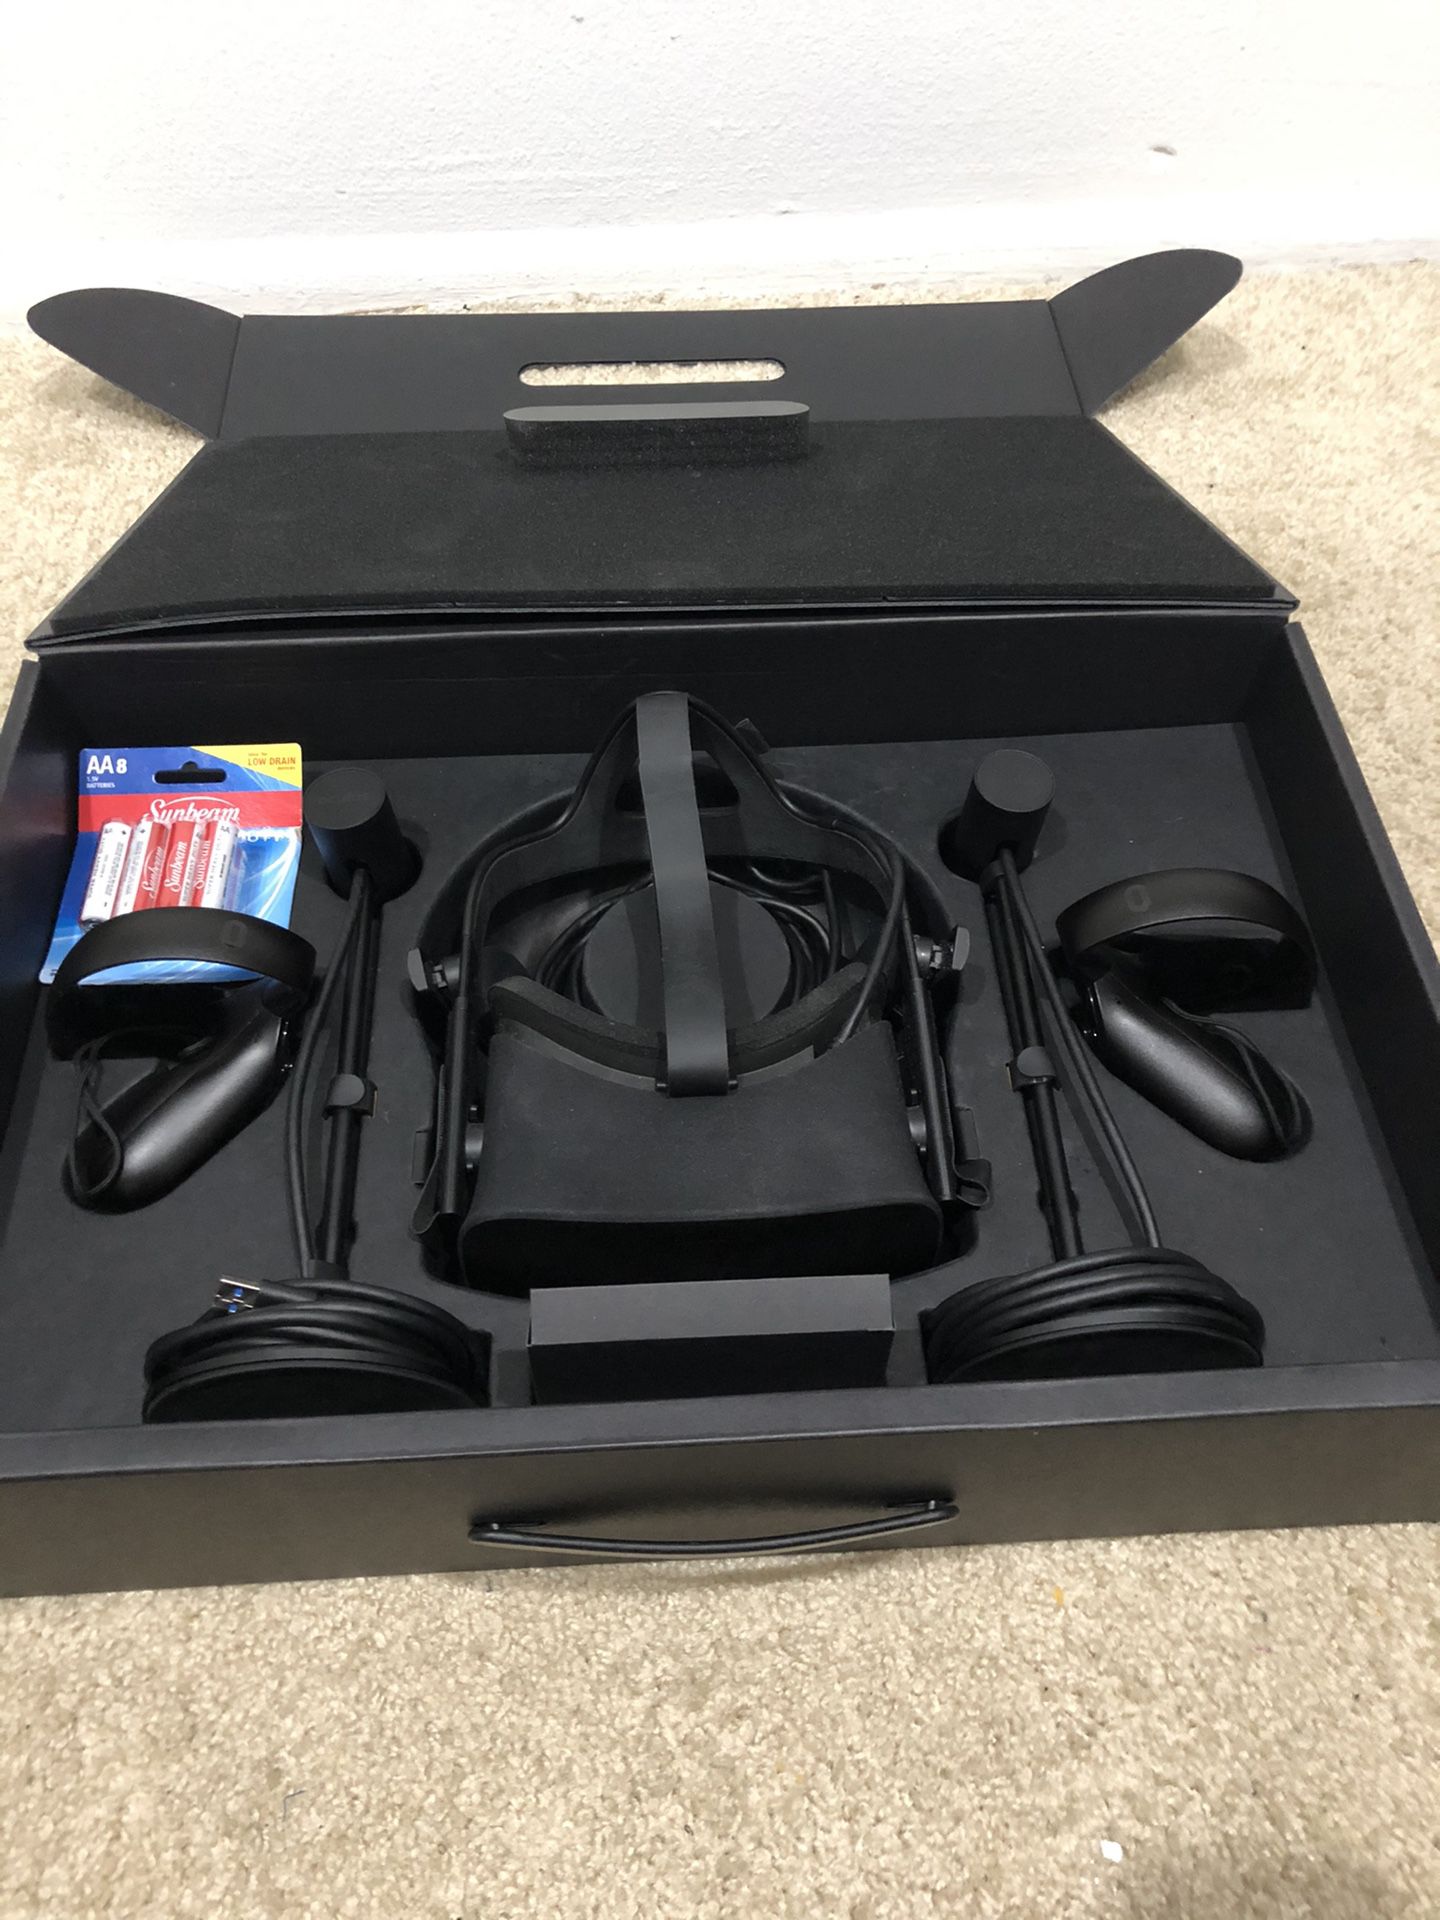 Oculus rift (used, in good condition)